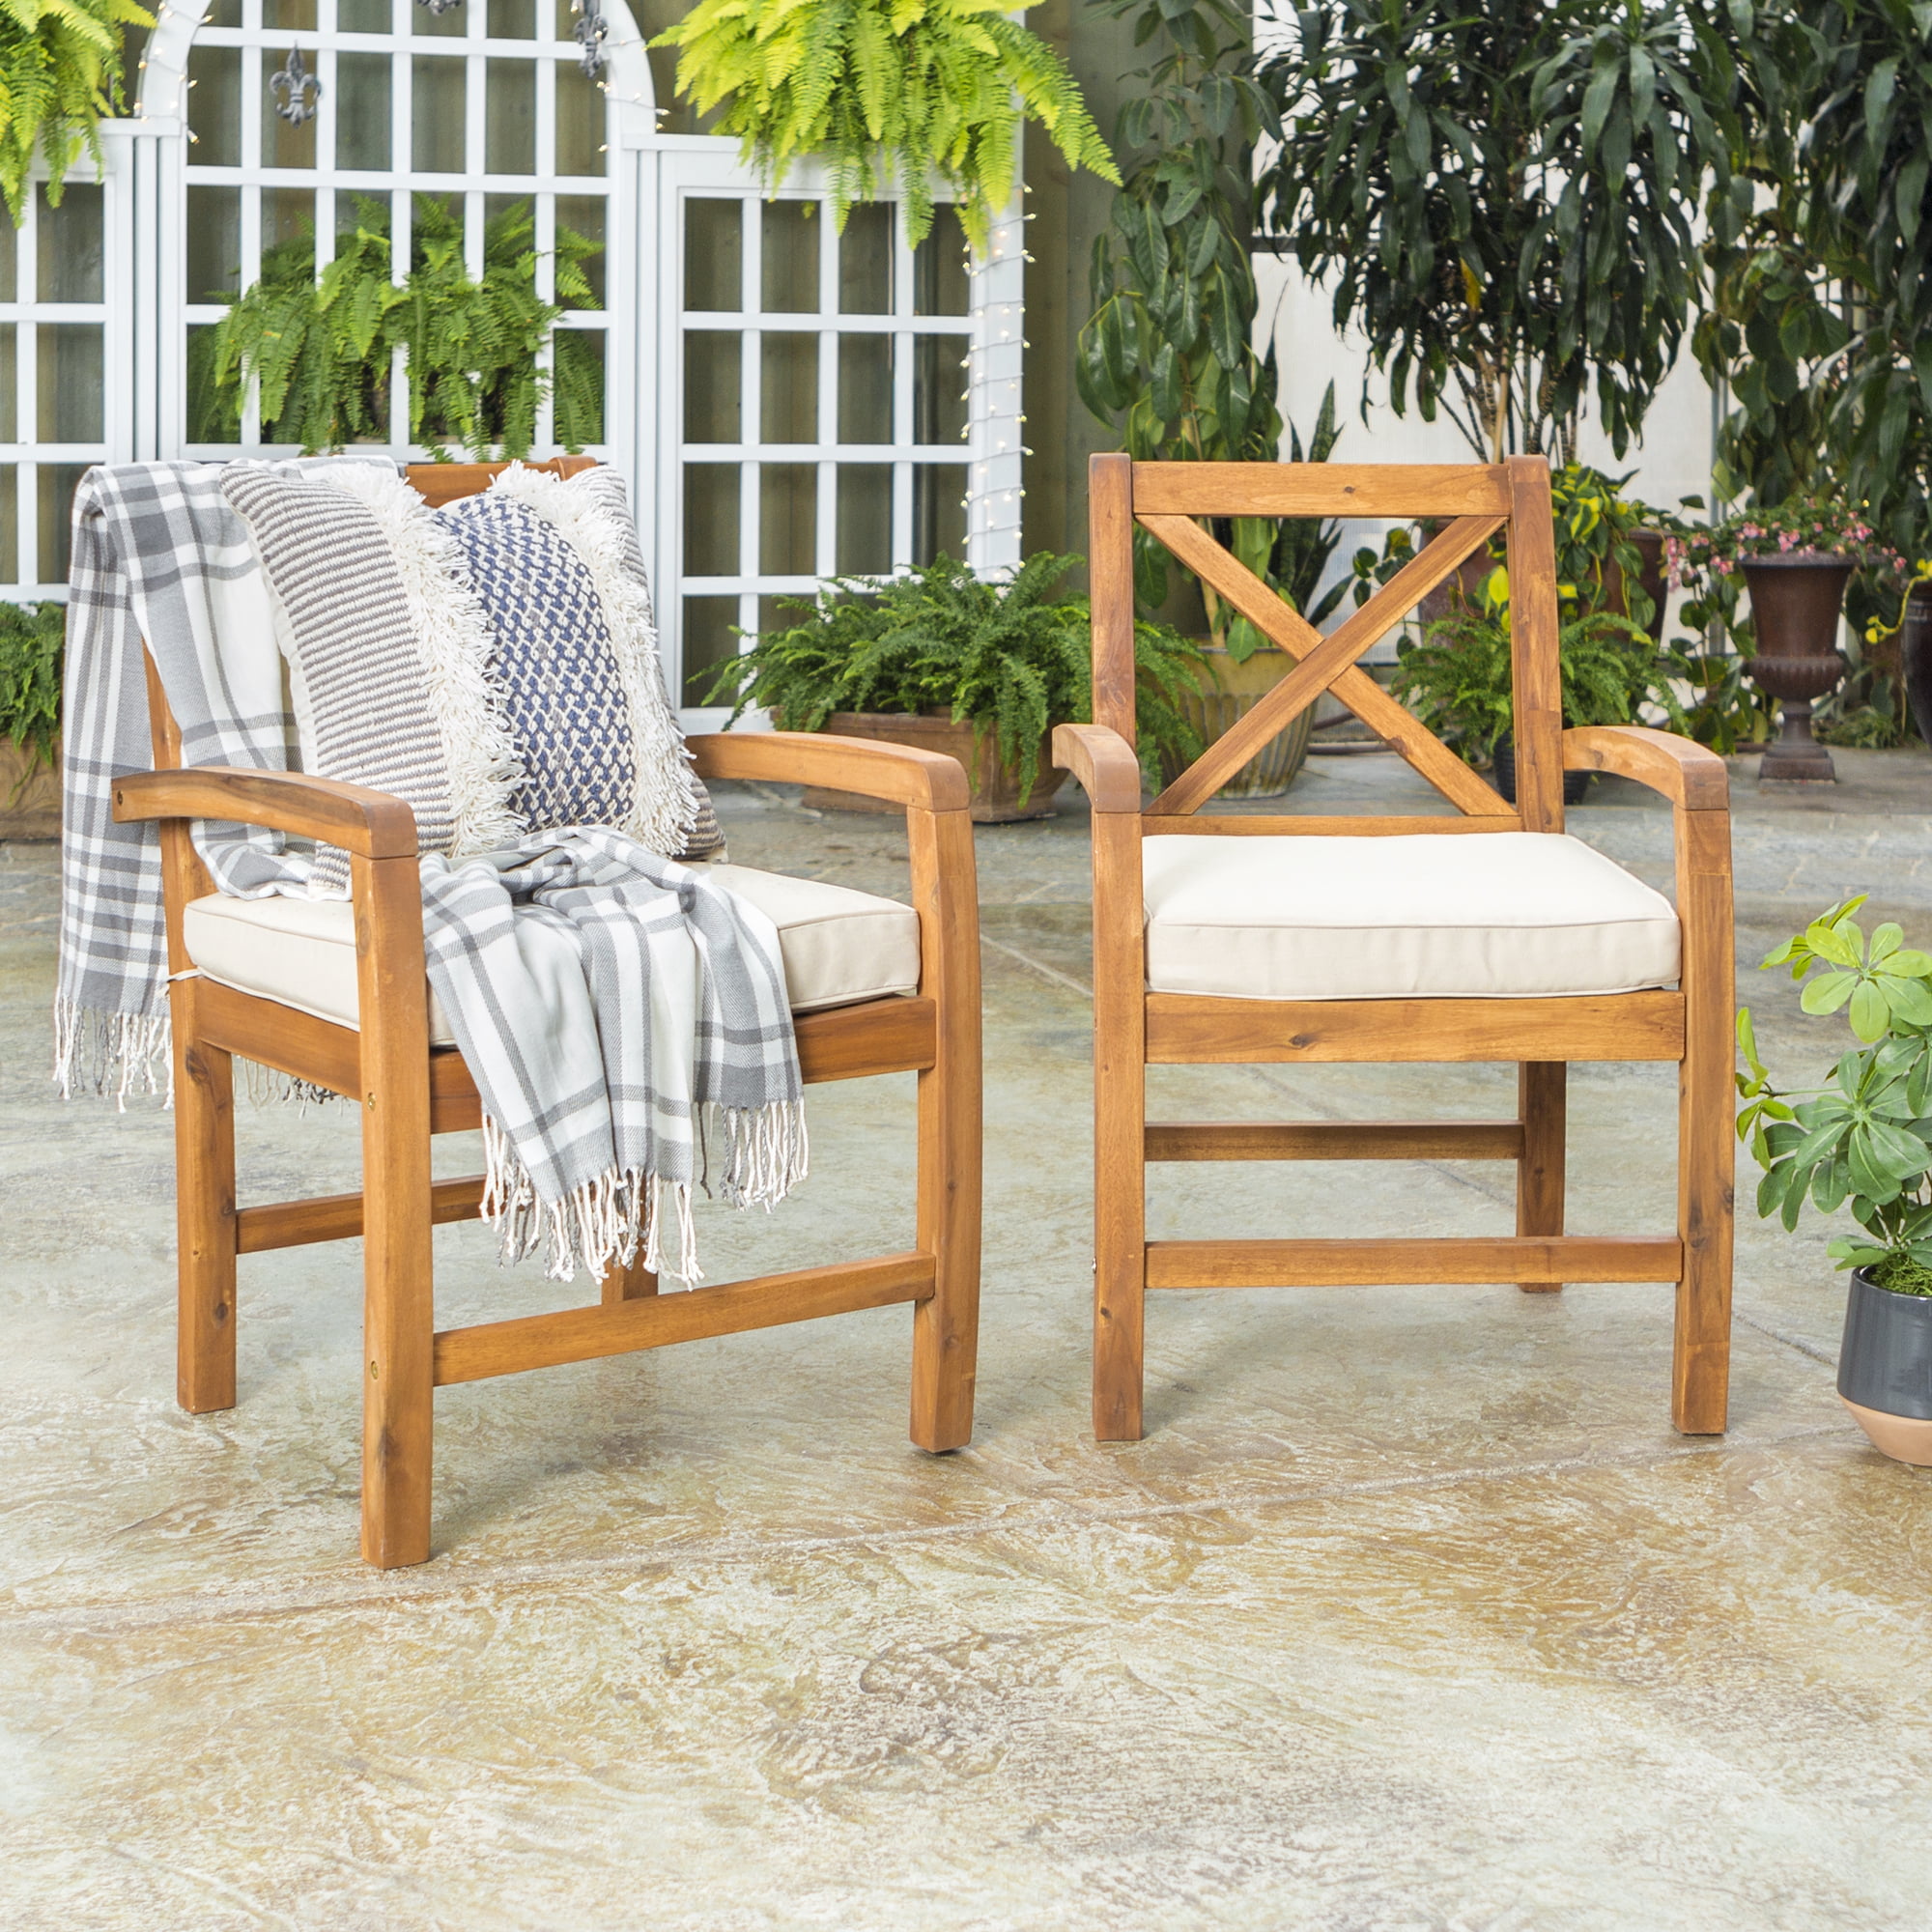 manor park xback outdoor patio chairs with cushions set of 2 brown   walmart